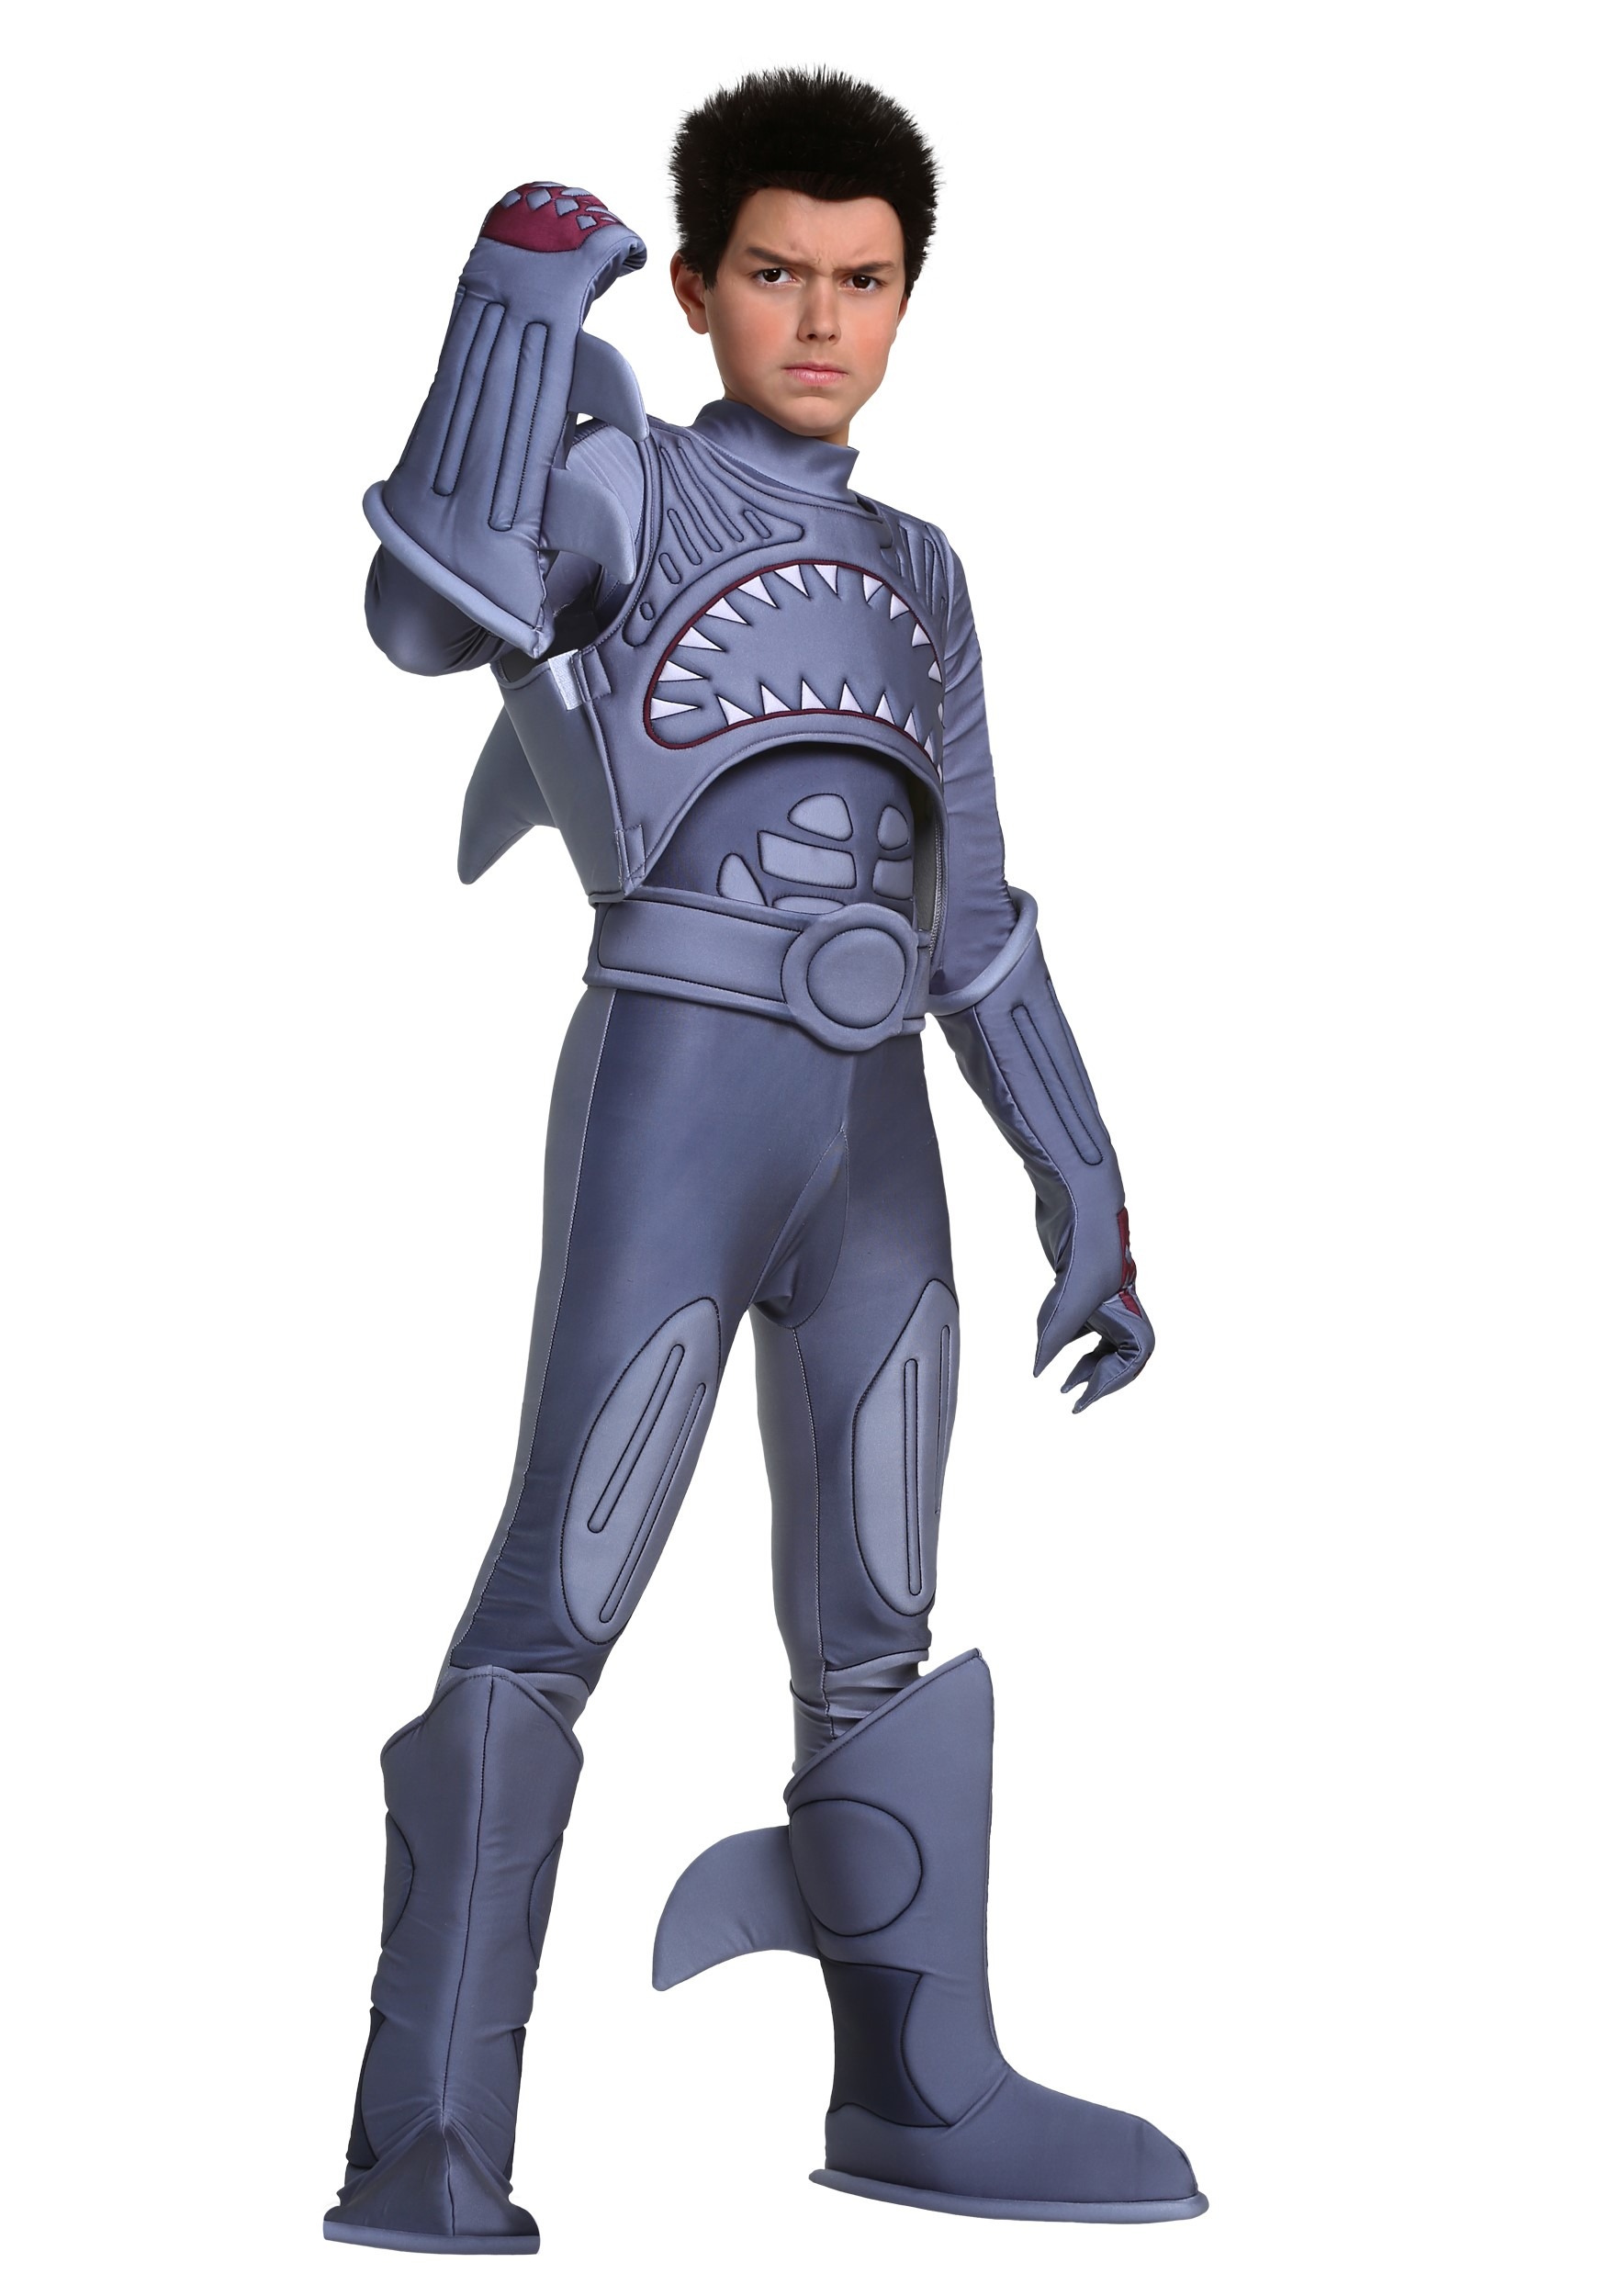 Sharkboy Costume For Boys , Exclusive , Made By Us Costume